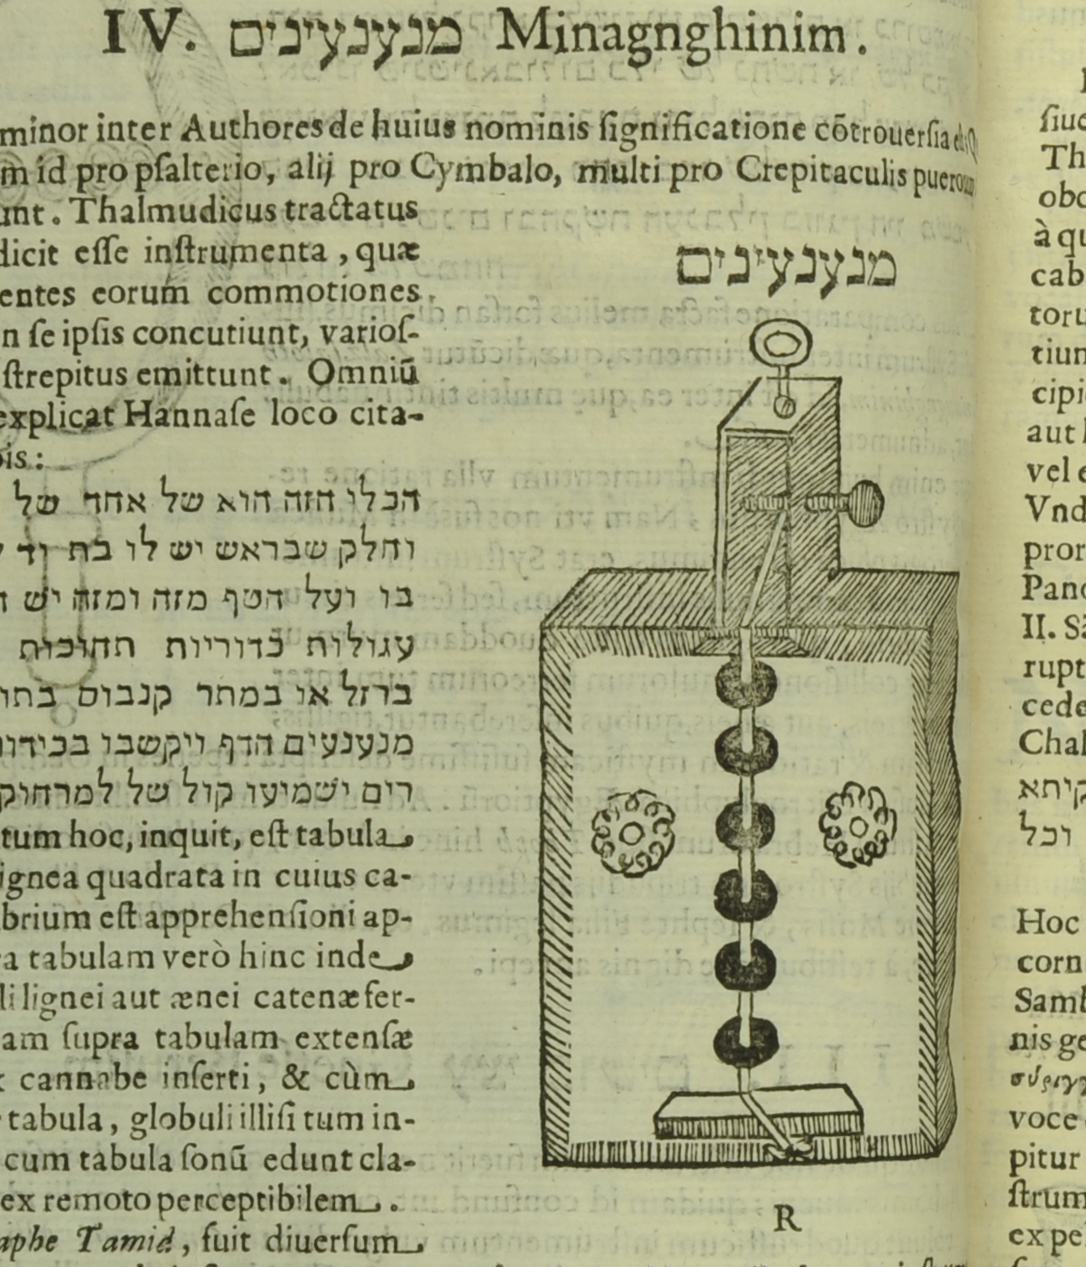 A description and depiction of a Hebrew "minagnghinim" from Kircher's Musurgia Universalis.